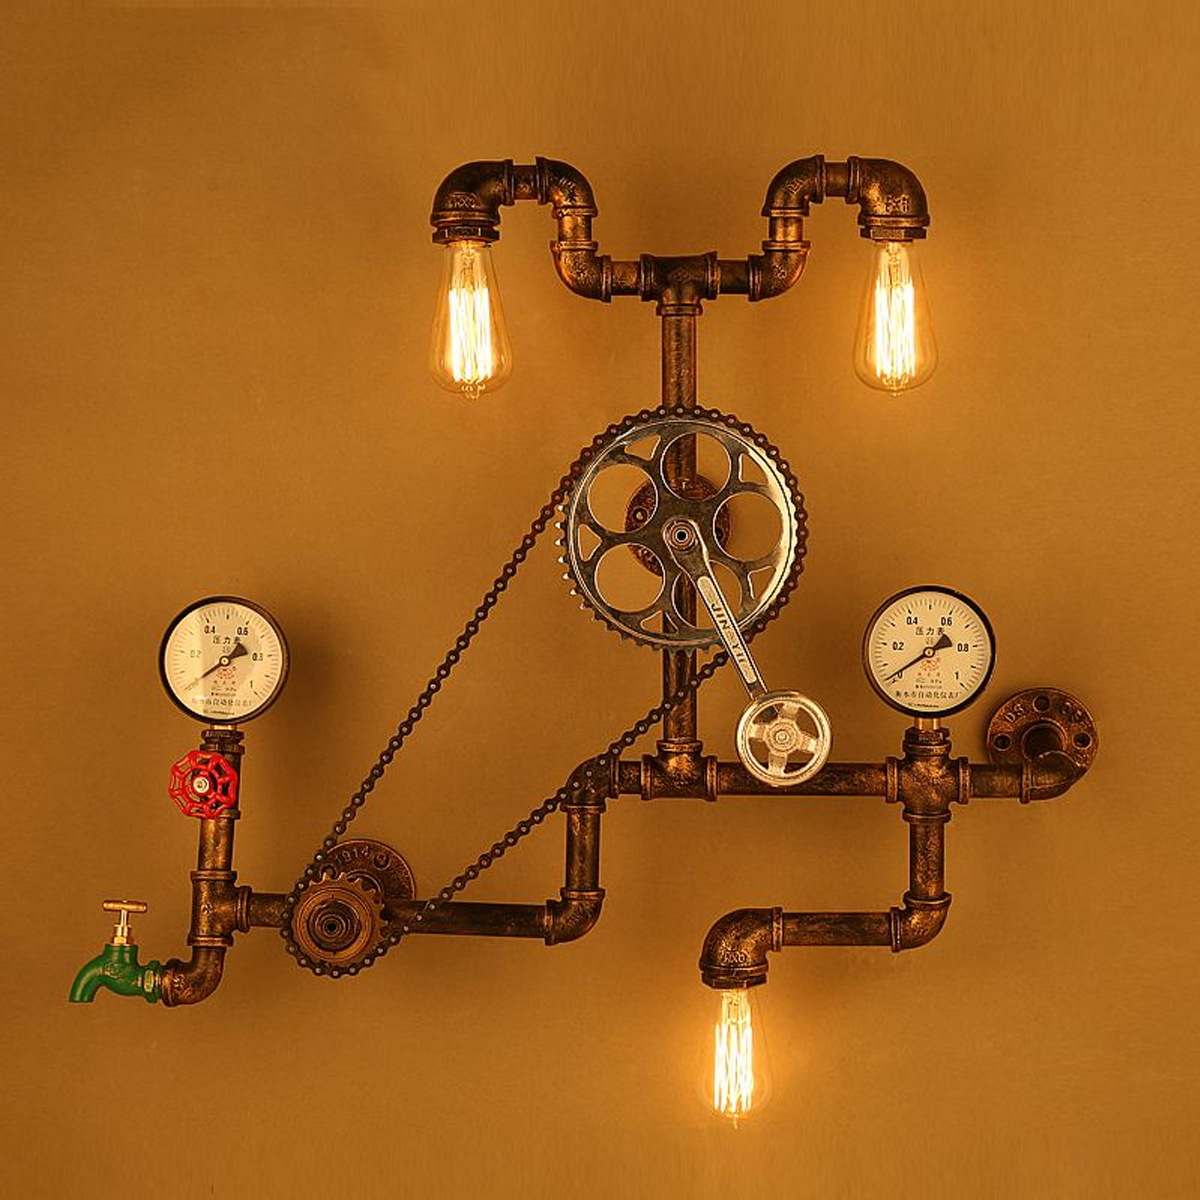 Vintage-Steampunk-34quot-Stop-Valve-Light-Switch-With-Wire-For-Water-Pipe-Lamps-1413189-2